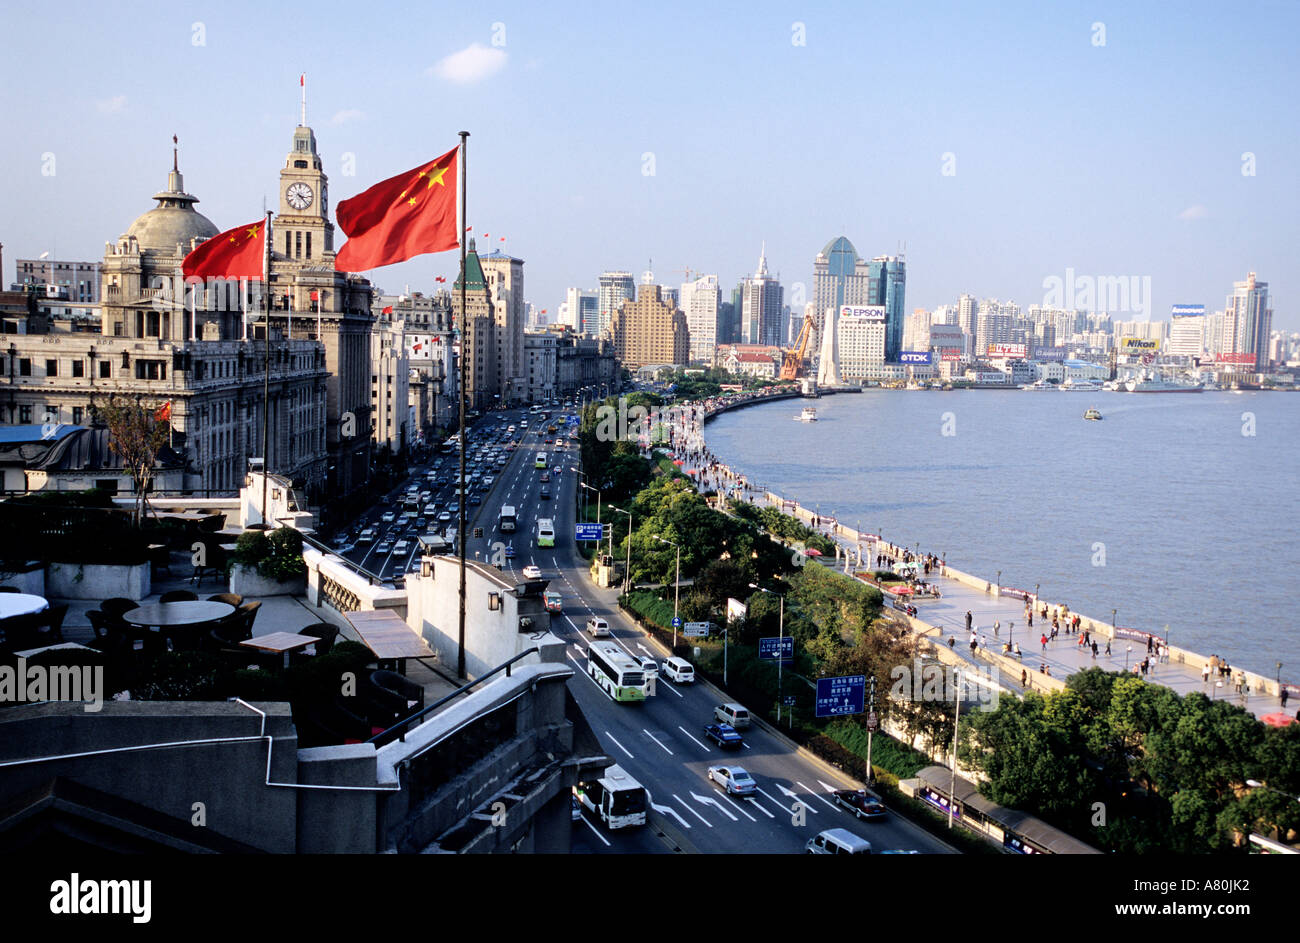 China, Shanghai, the M on the Bund restaurant with view over Huangpu river Stock Photo